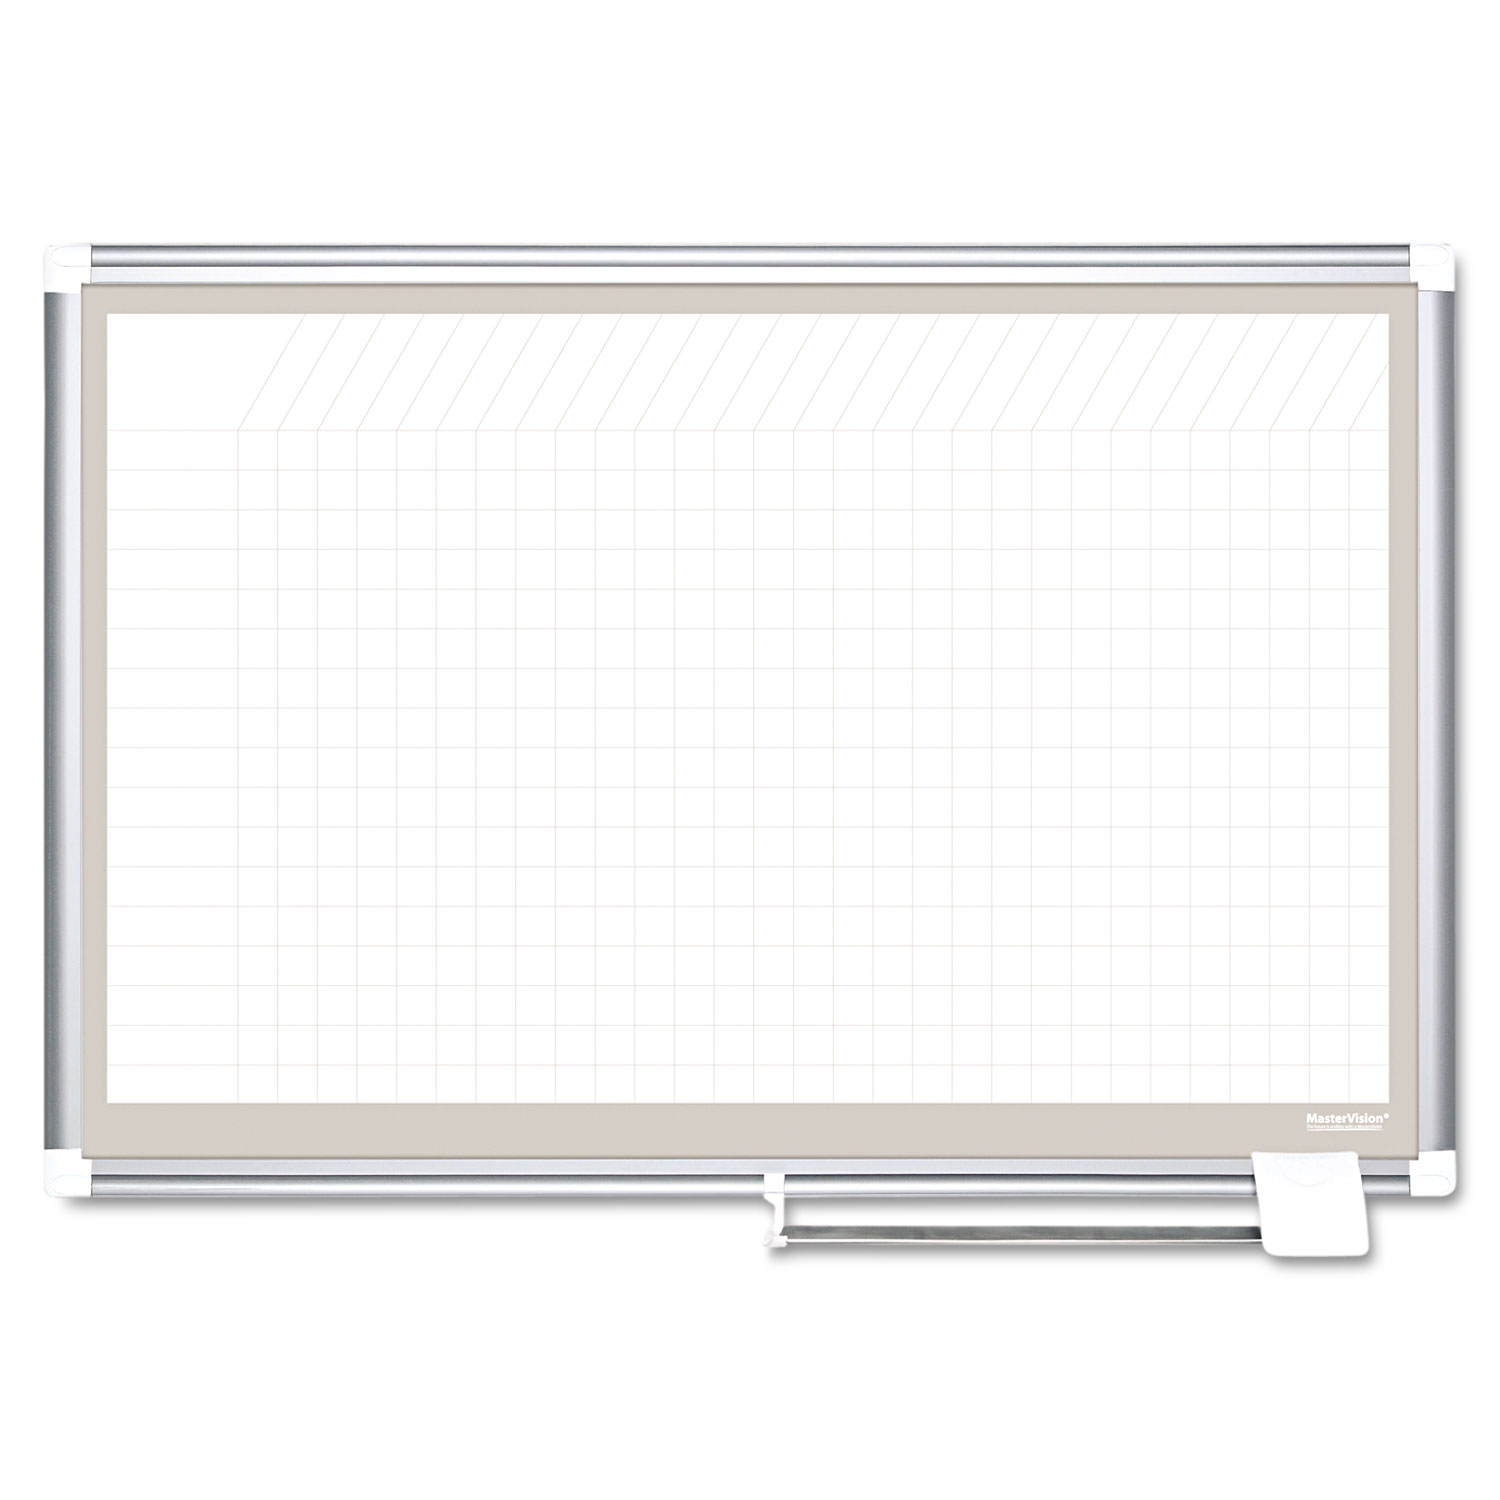  MasterVision CR0632830A All Purpose Porcelain Dry Erase Planning Board, 1 x 1 Grid, 36 x 24, Aluminum (BVCCR0632830A) 